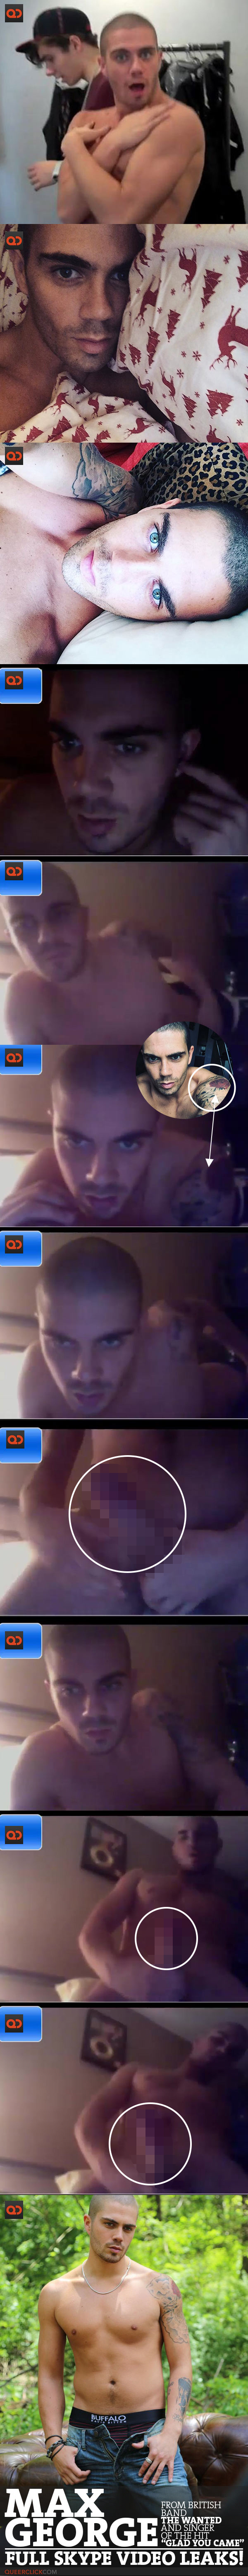 Max George, Member Of The British Band The Wanted And Singer Of The Hit “Glad You Came”, Full Skype Video Leaks!